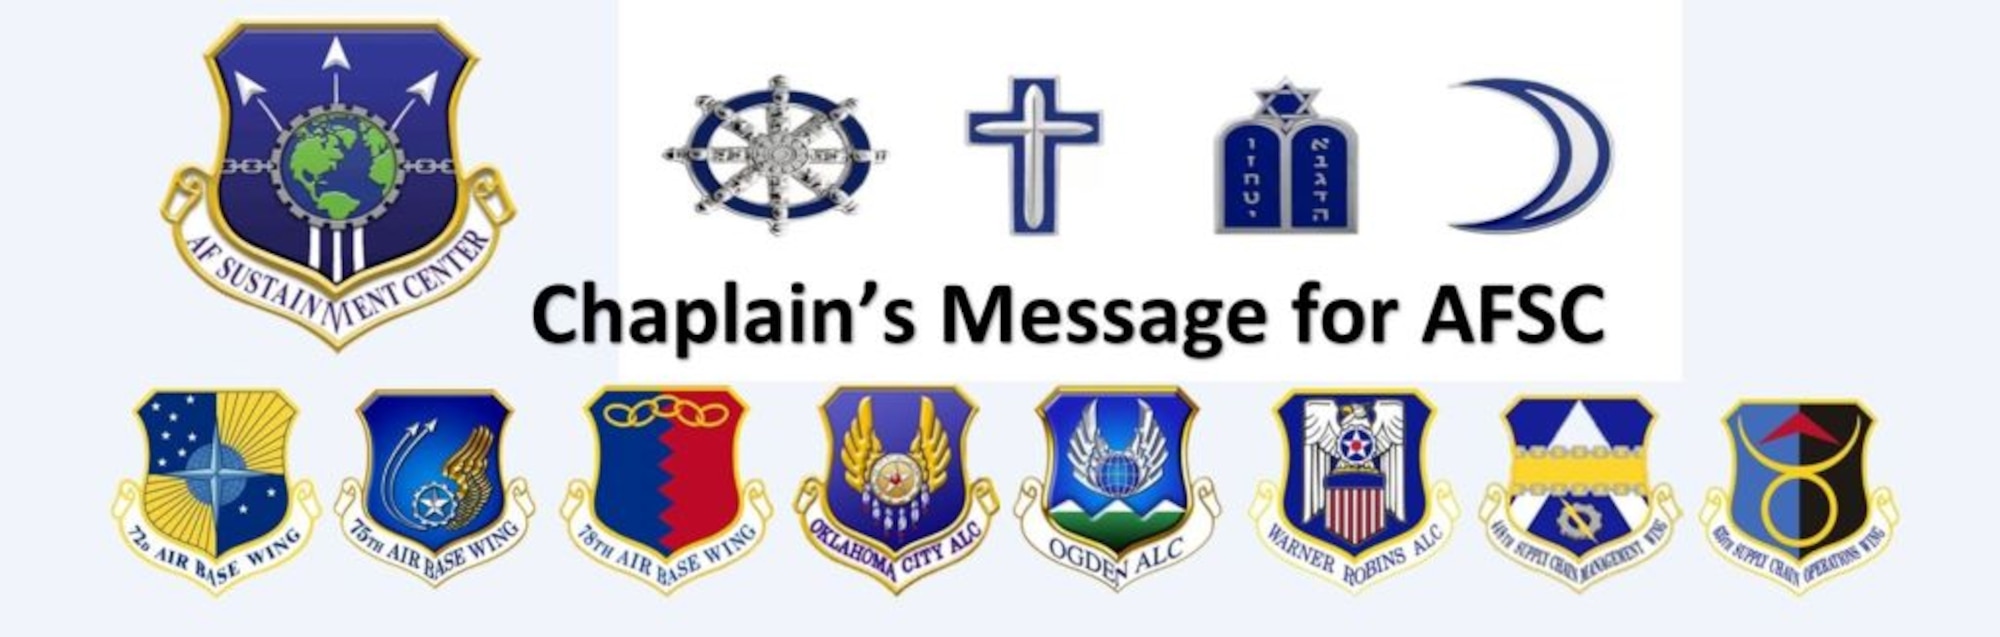 Chaplain's Message for AFSC: Extreme